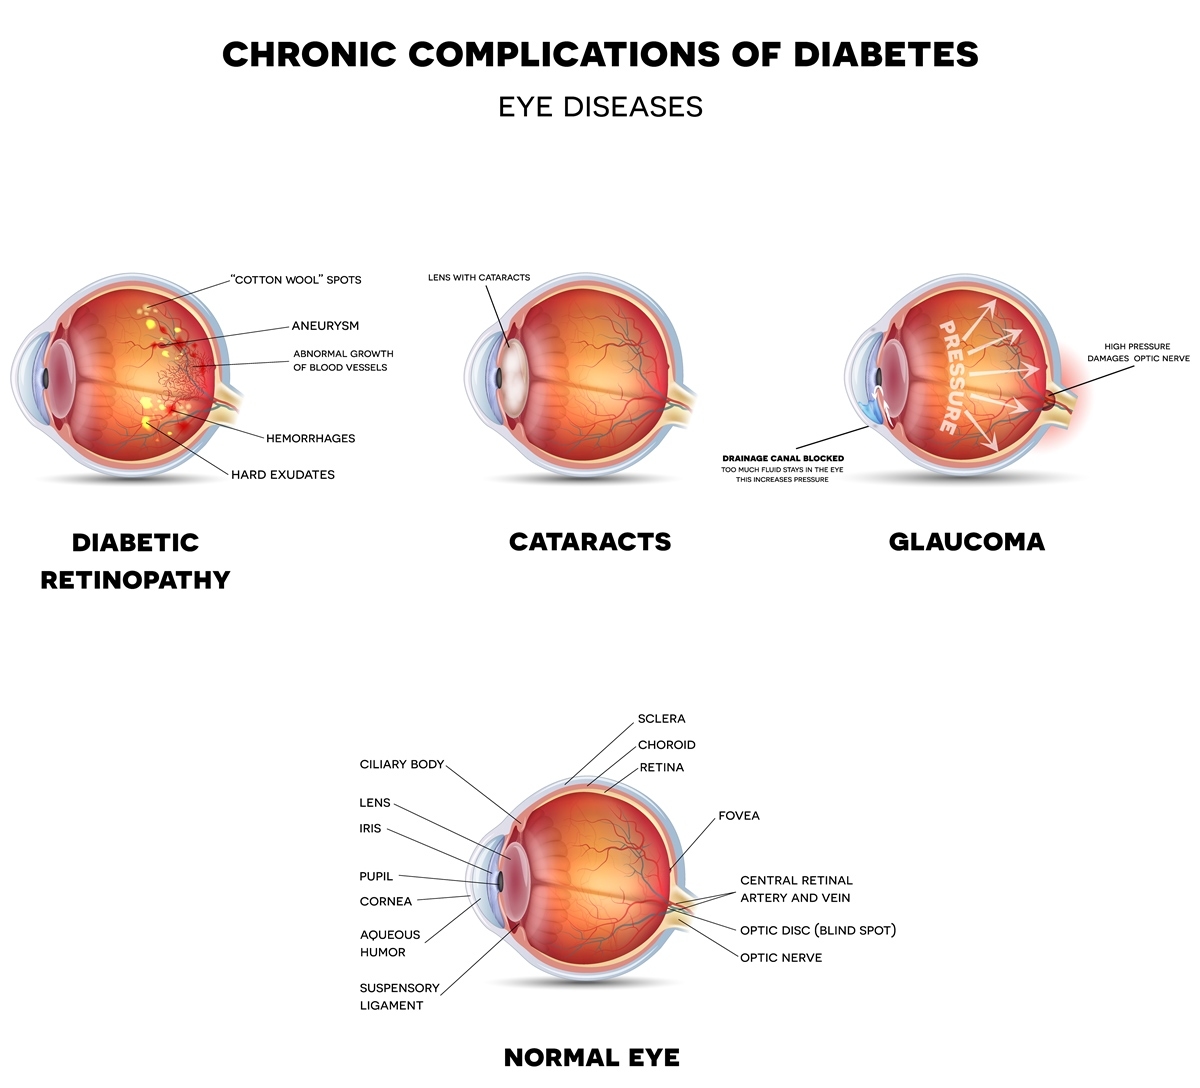 Chronic Complications of Diabetes